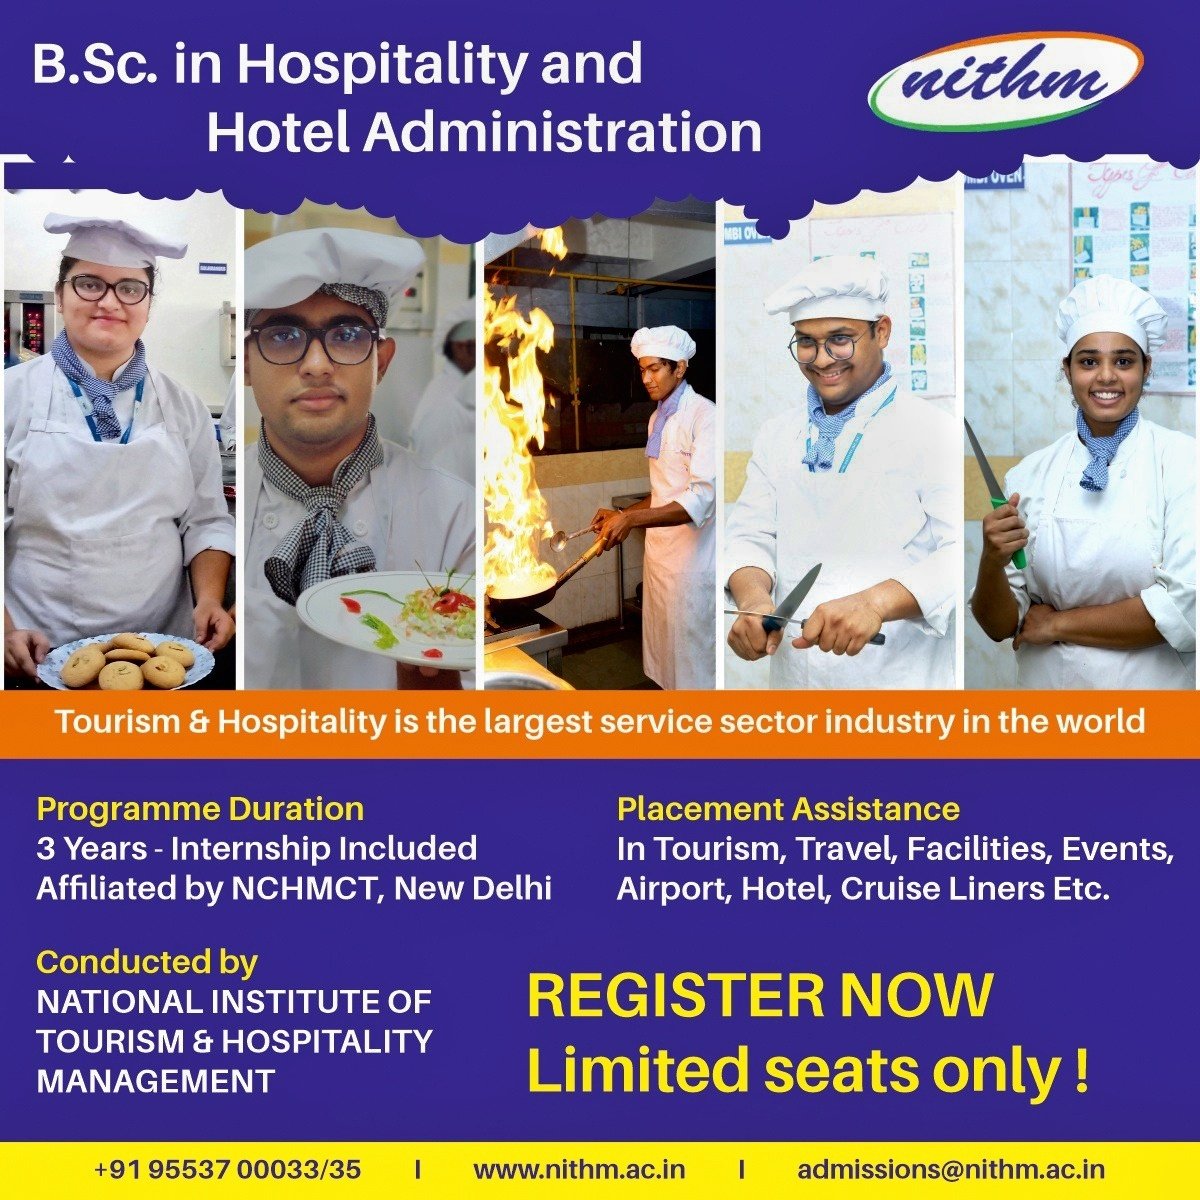 Join the intense study BSc (#Hospitality & #HotelAdministration) degree course at #NITHM through #JNU under #NCHMCT

Promo video: youtu.be/KT9V3oul07I

#Admissions2023 #IHM #BSc #TourismCareer #HospitalityCareer #BachelorsDegree #HigherEducation #Hyderabad #EnrollToday #CallUs